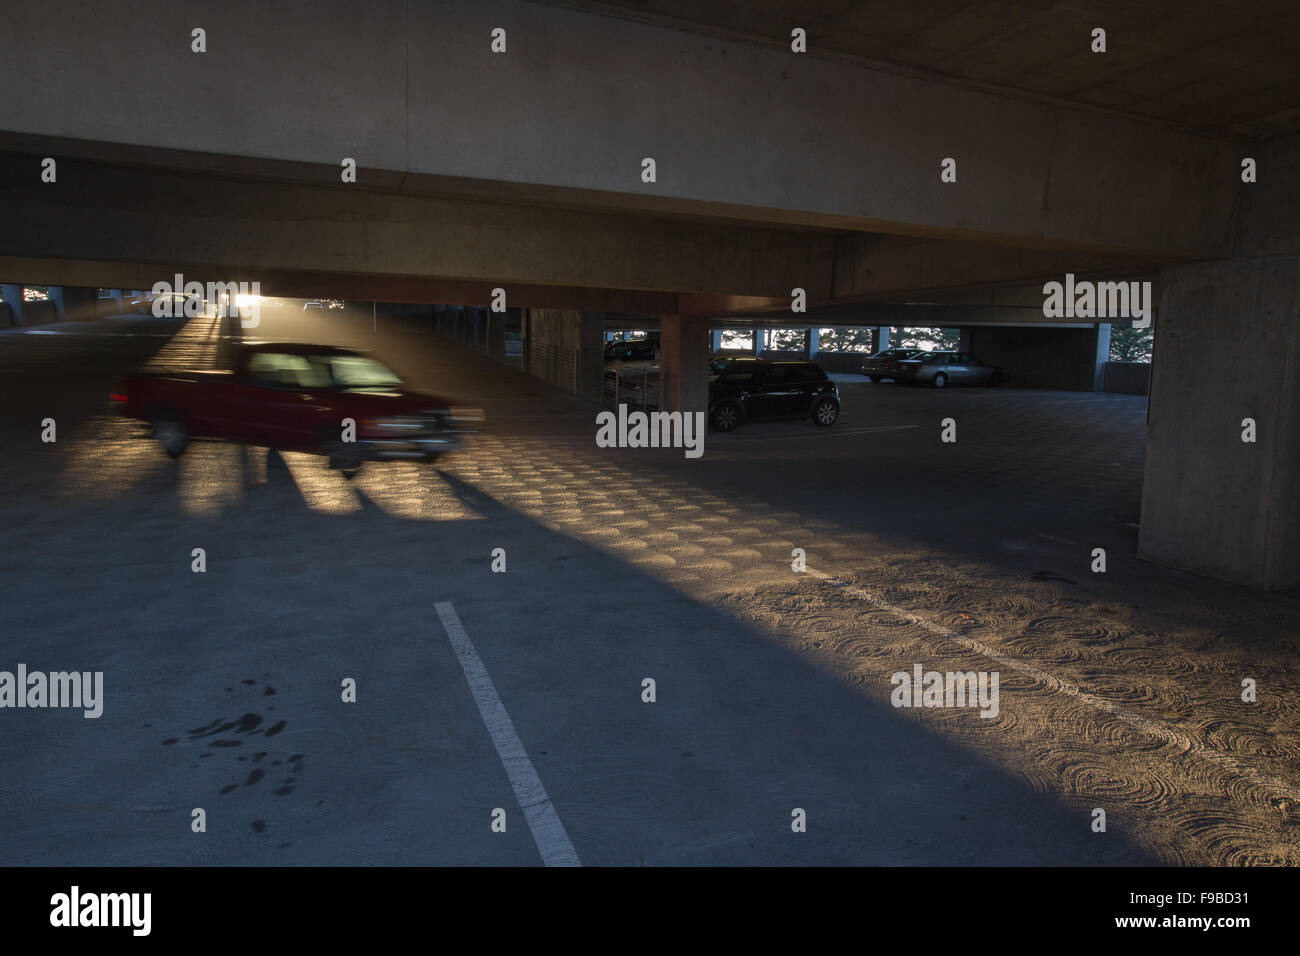 car blurring by in a parking structure Stock Photo